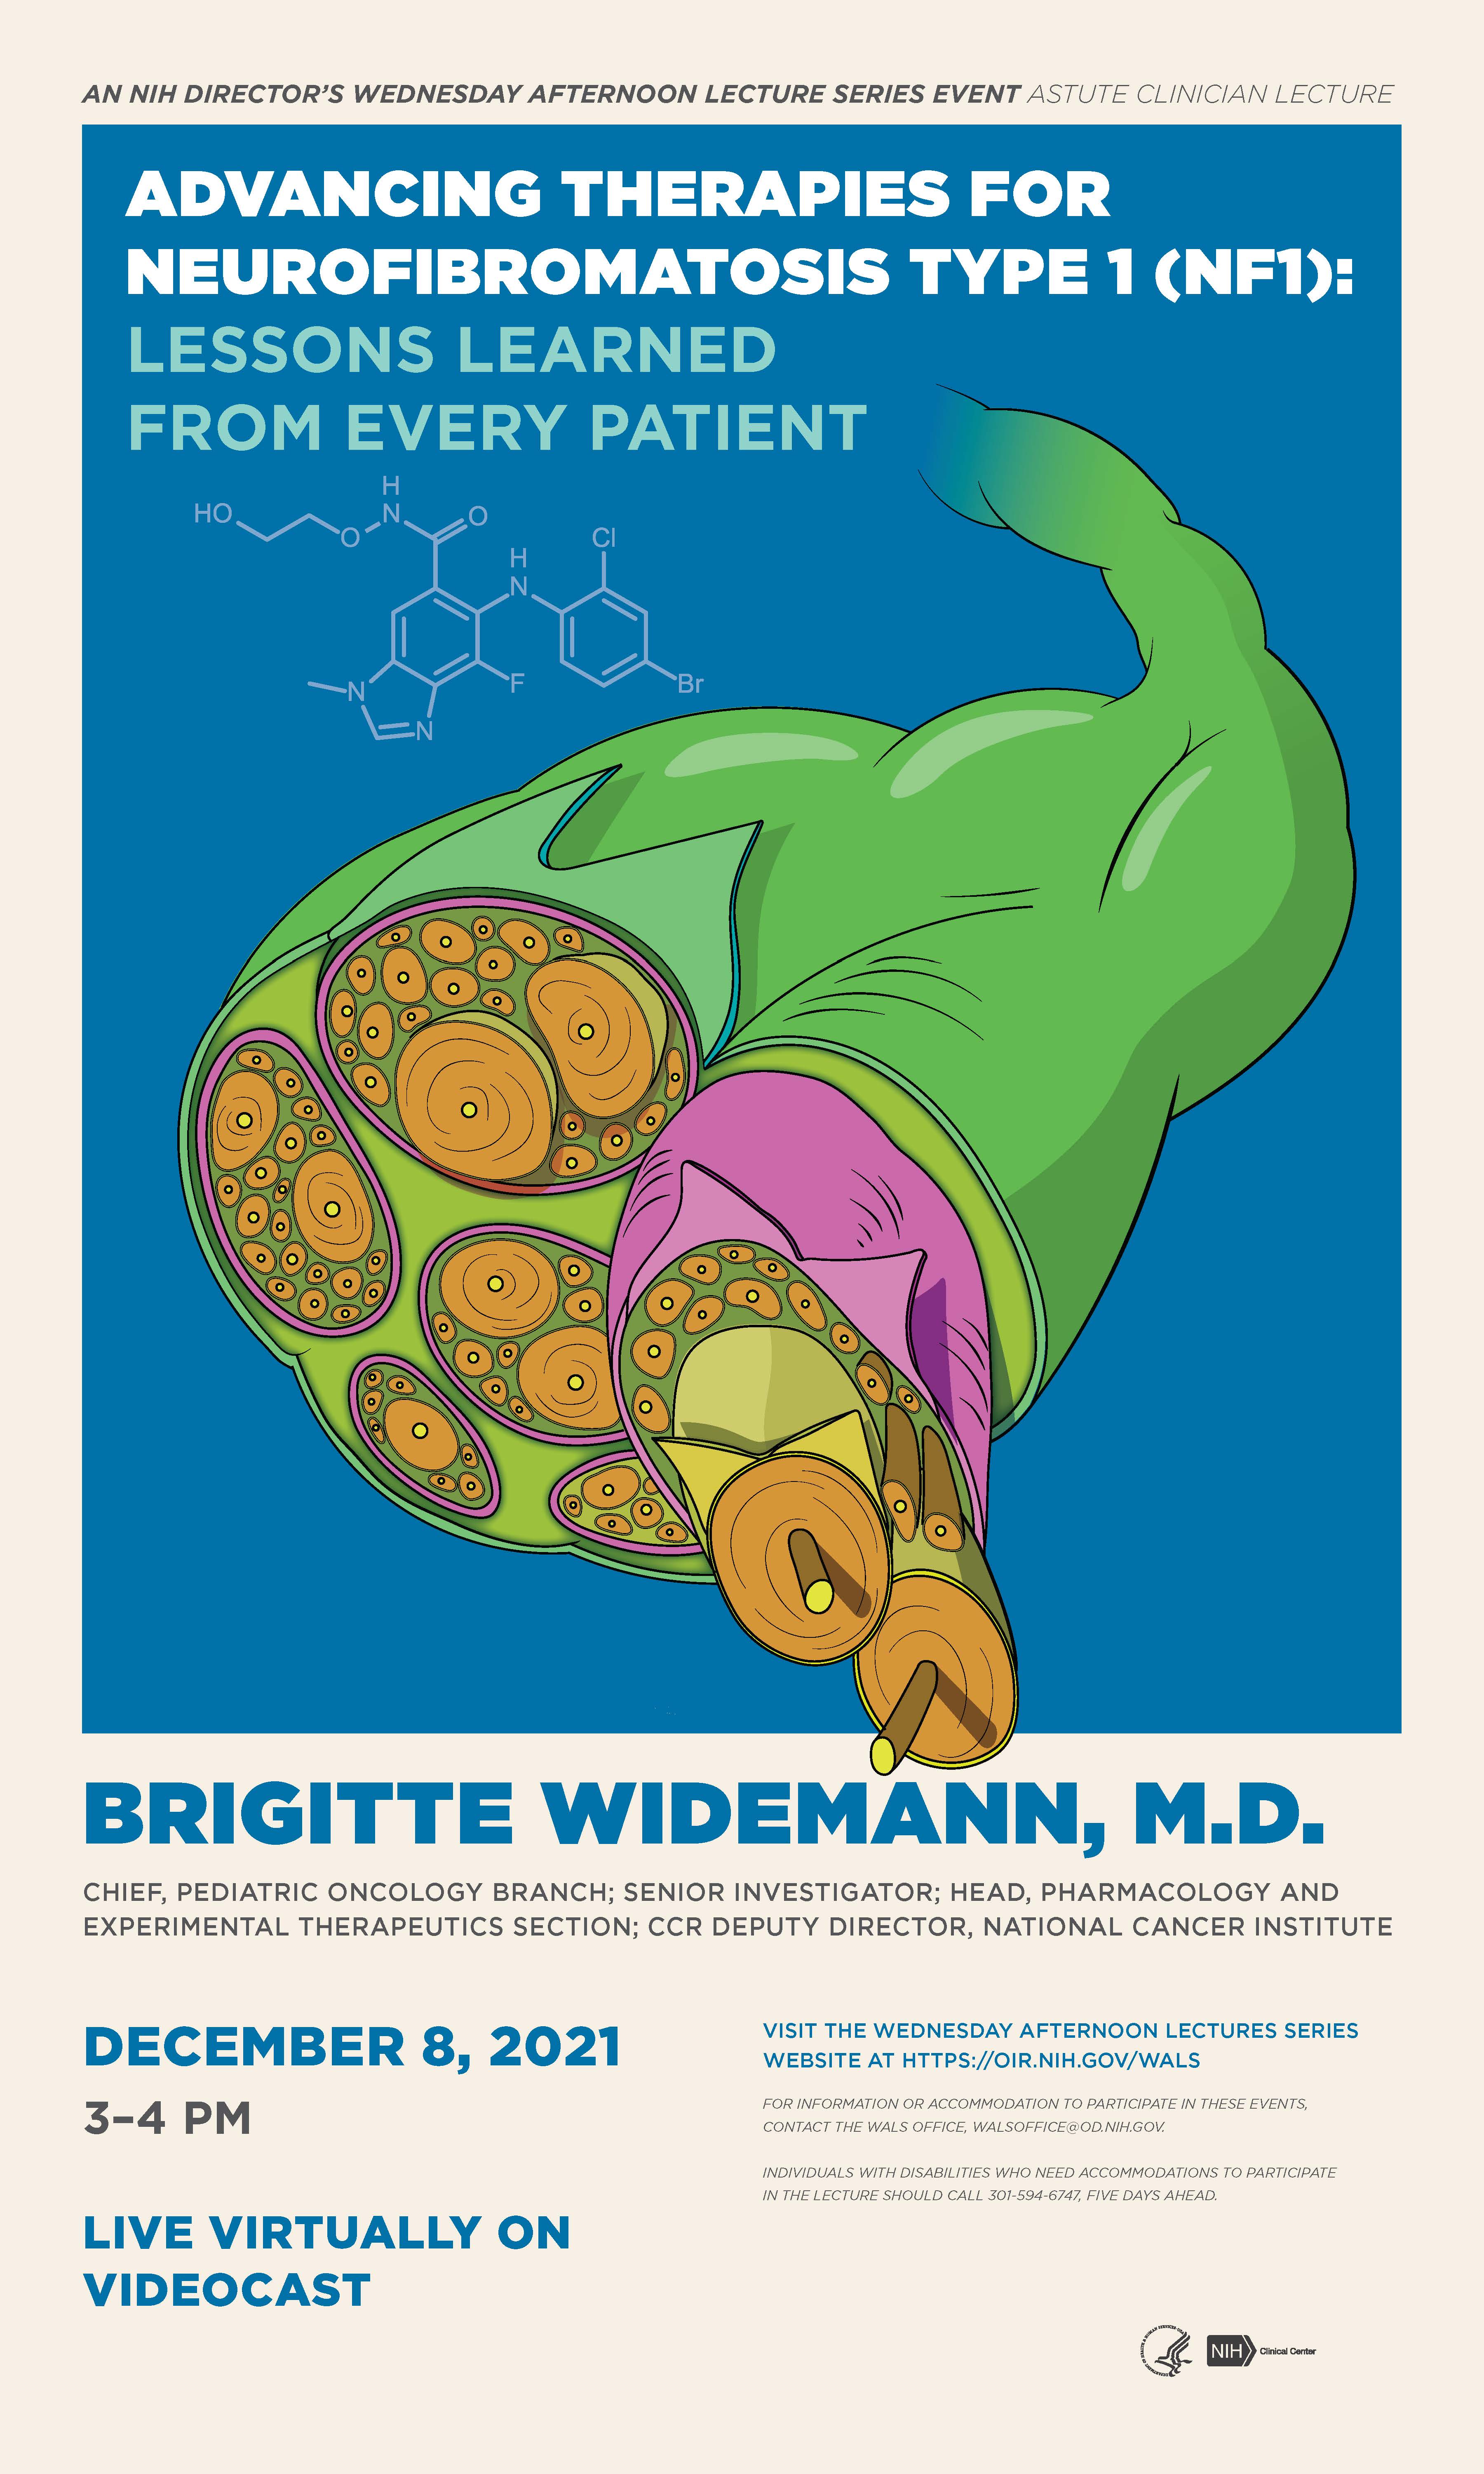 Flyer for the 24th Astute Clinician Lecture on Dec. 8, 2021 (Remote Only) from 3-4 pm - Advancing Therapies for Neurofibromatosis Type 1 (NF1): Lessons Learned from Every Patient presented by Brigitte C. Widemann, MD